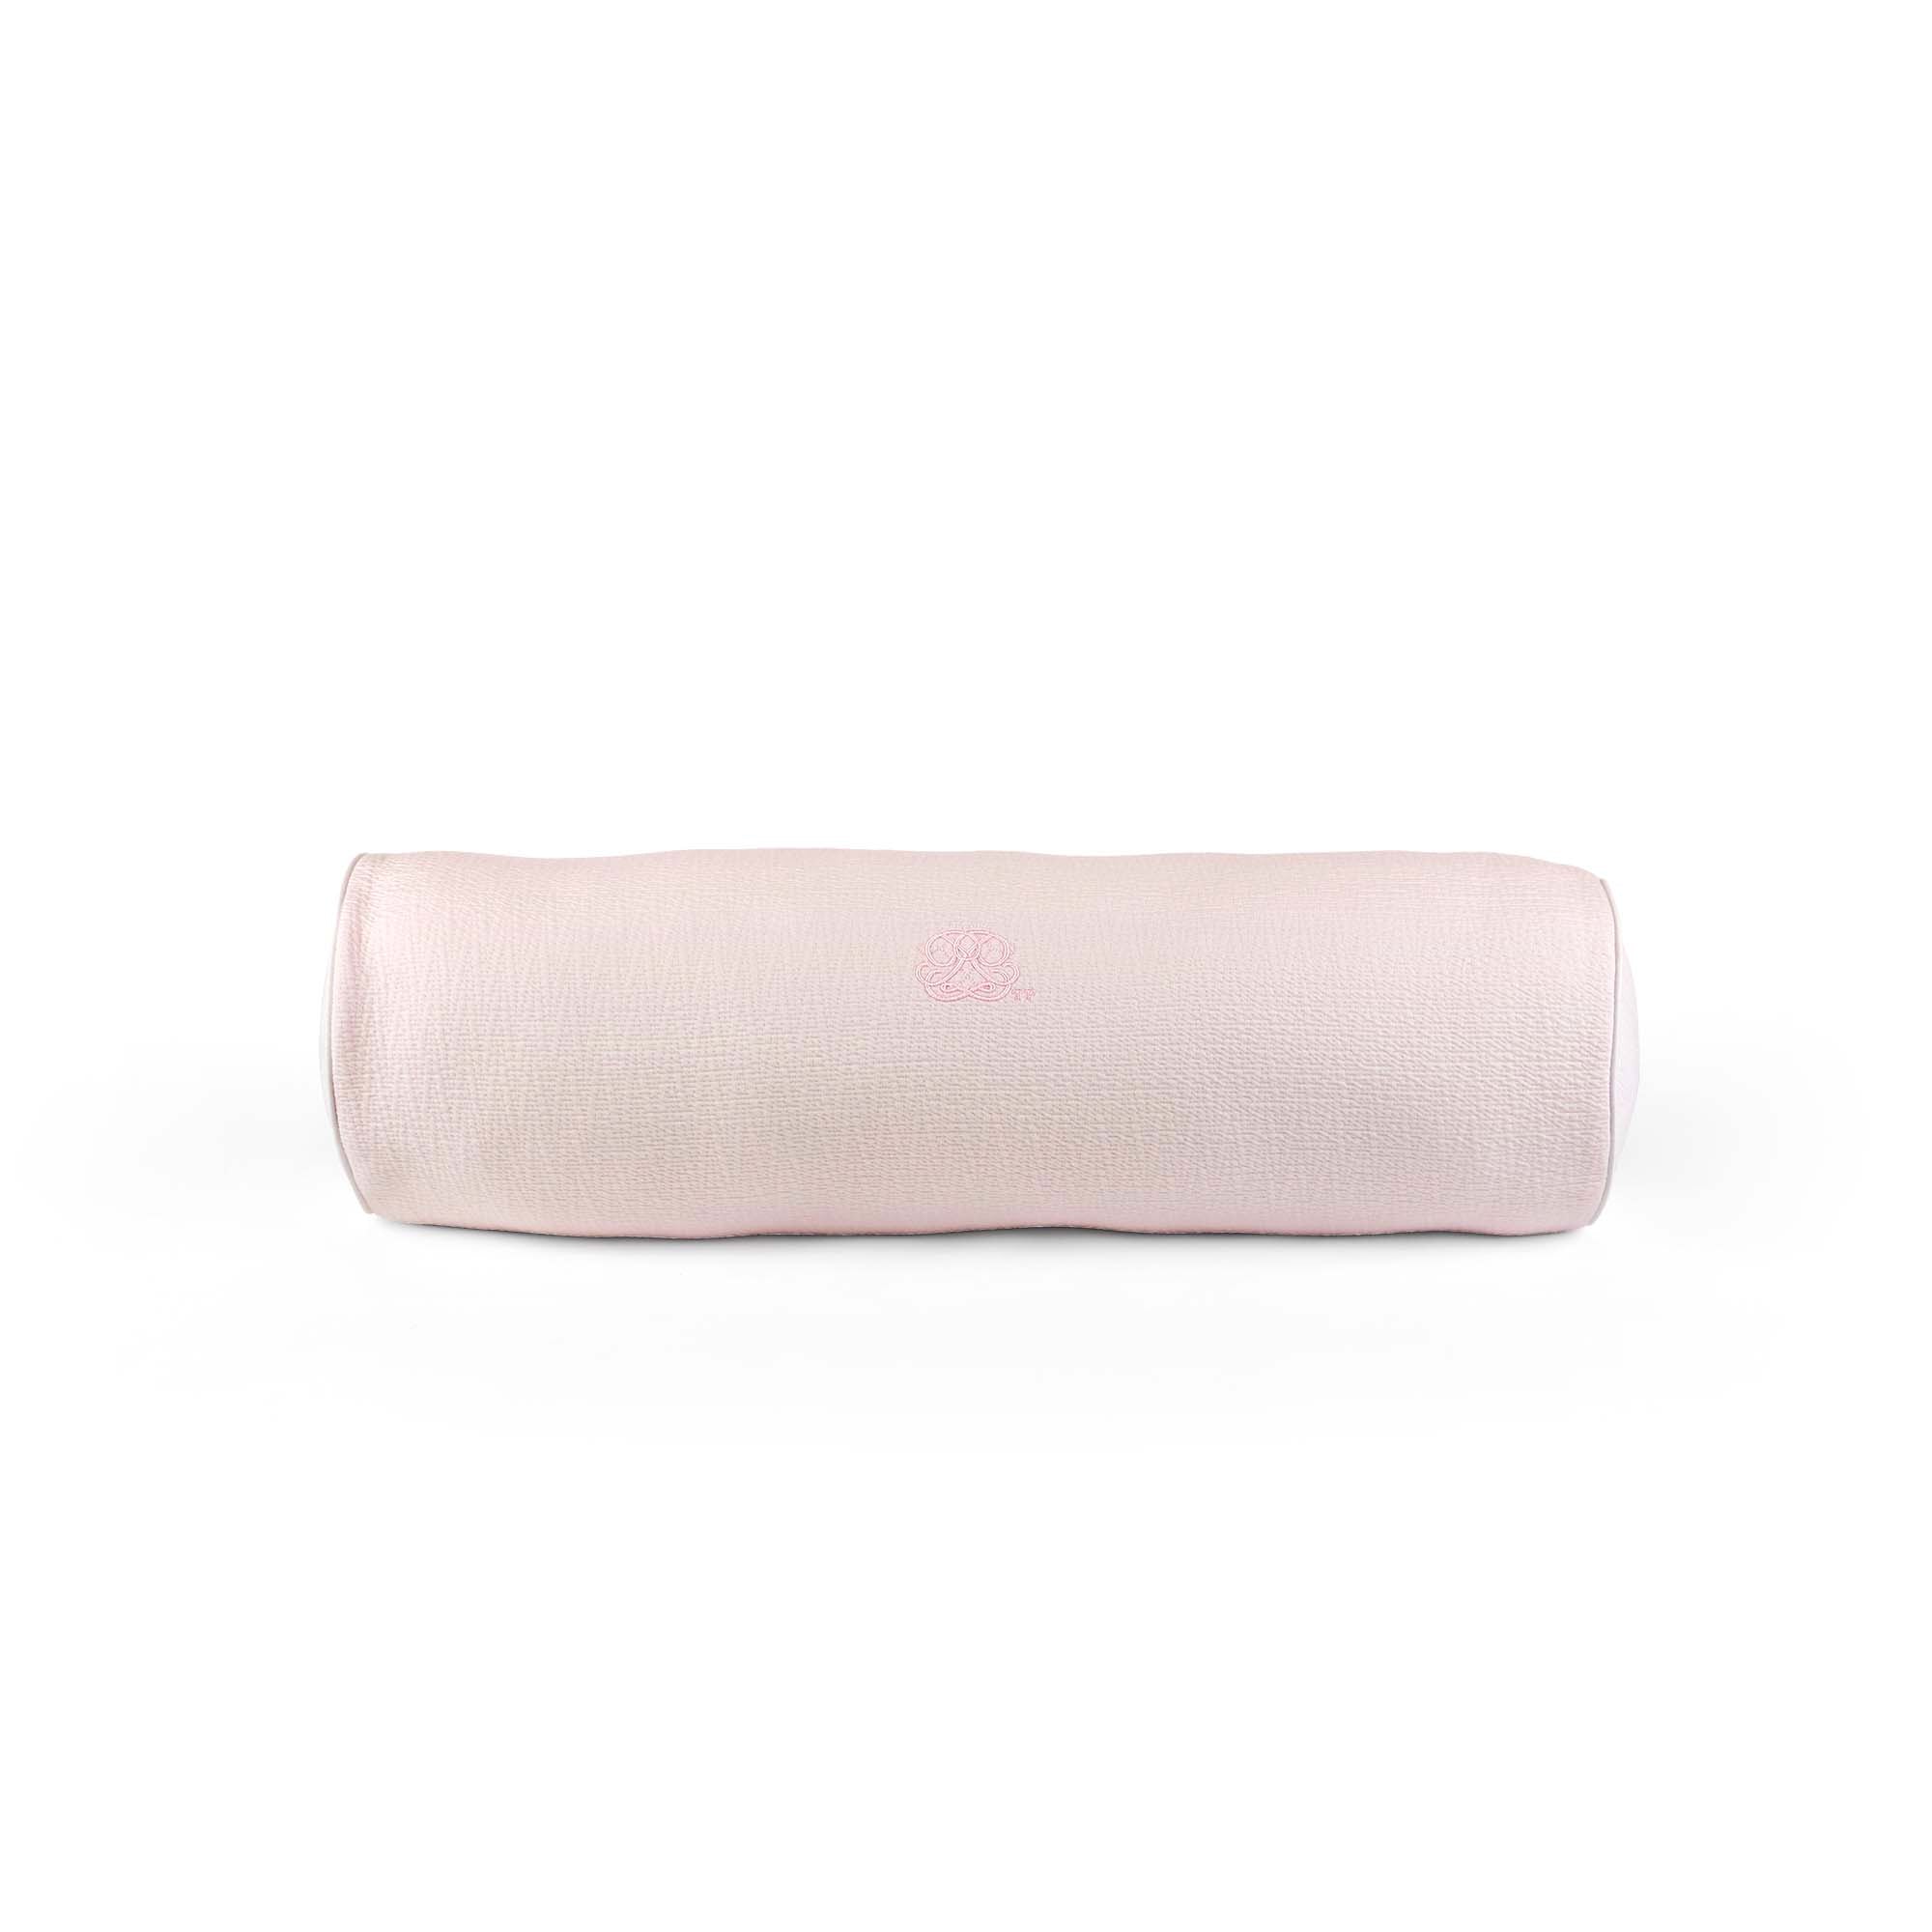 Theophile & Patachou Baby Bolster - Cotton Pink